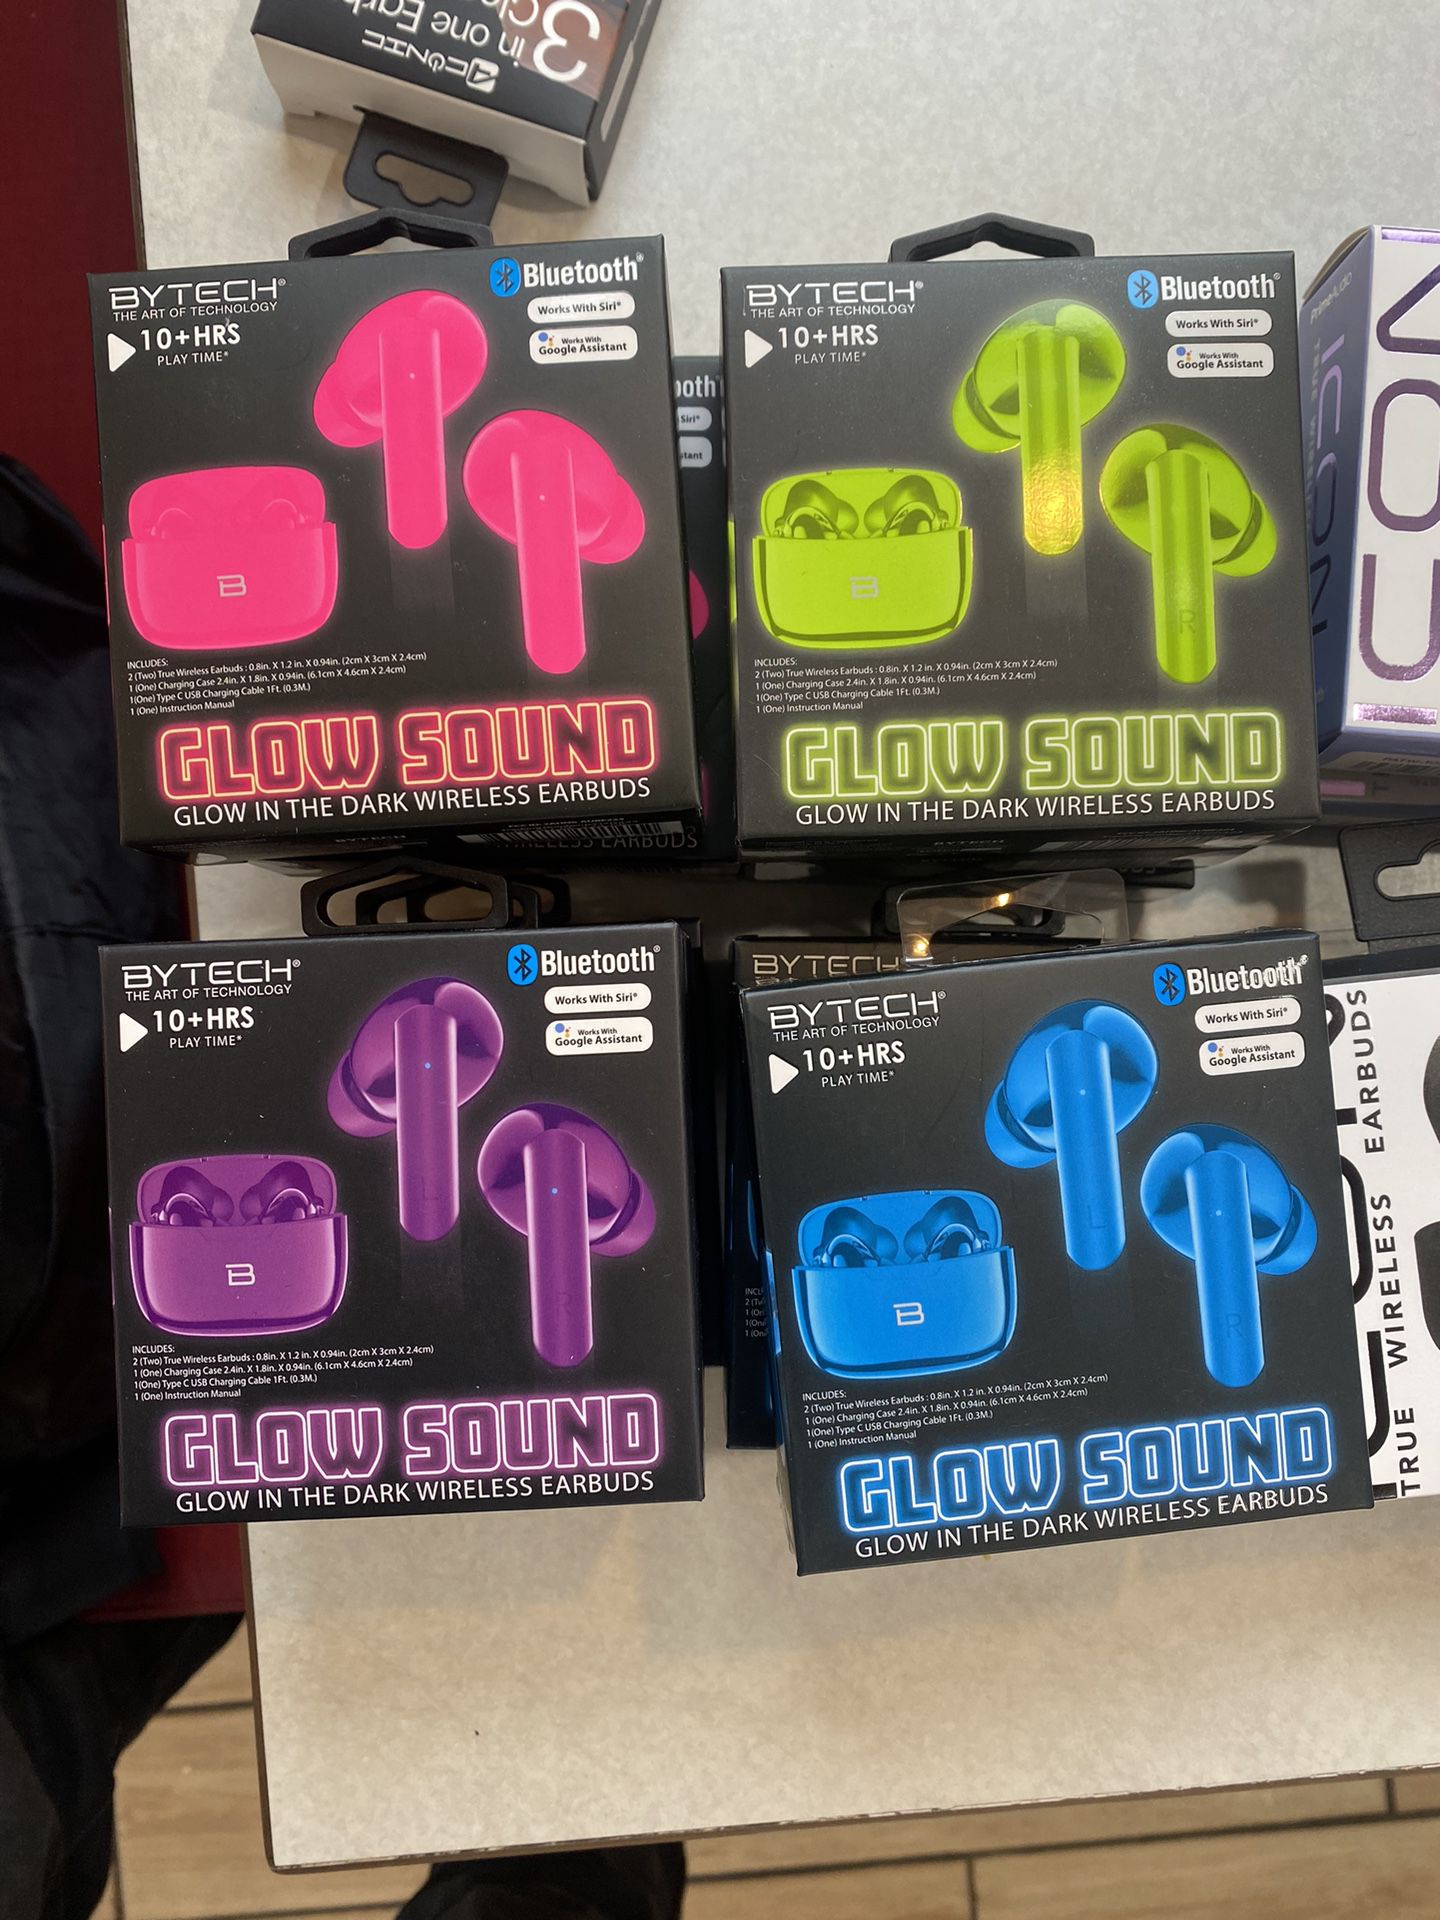 Glow in the Dark Earbuds (Bluetooth)